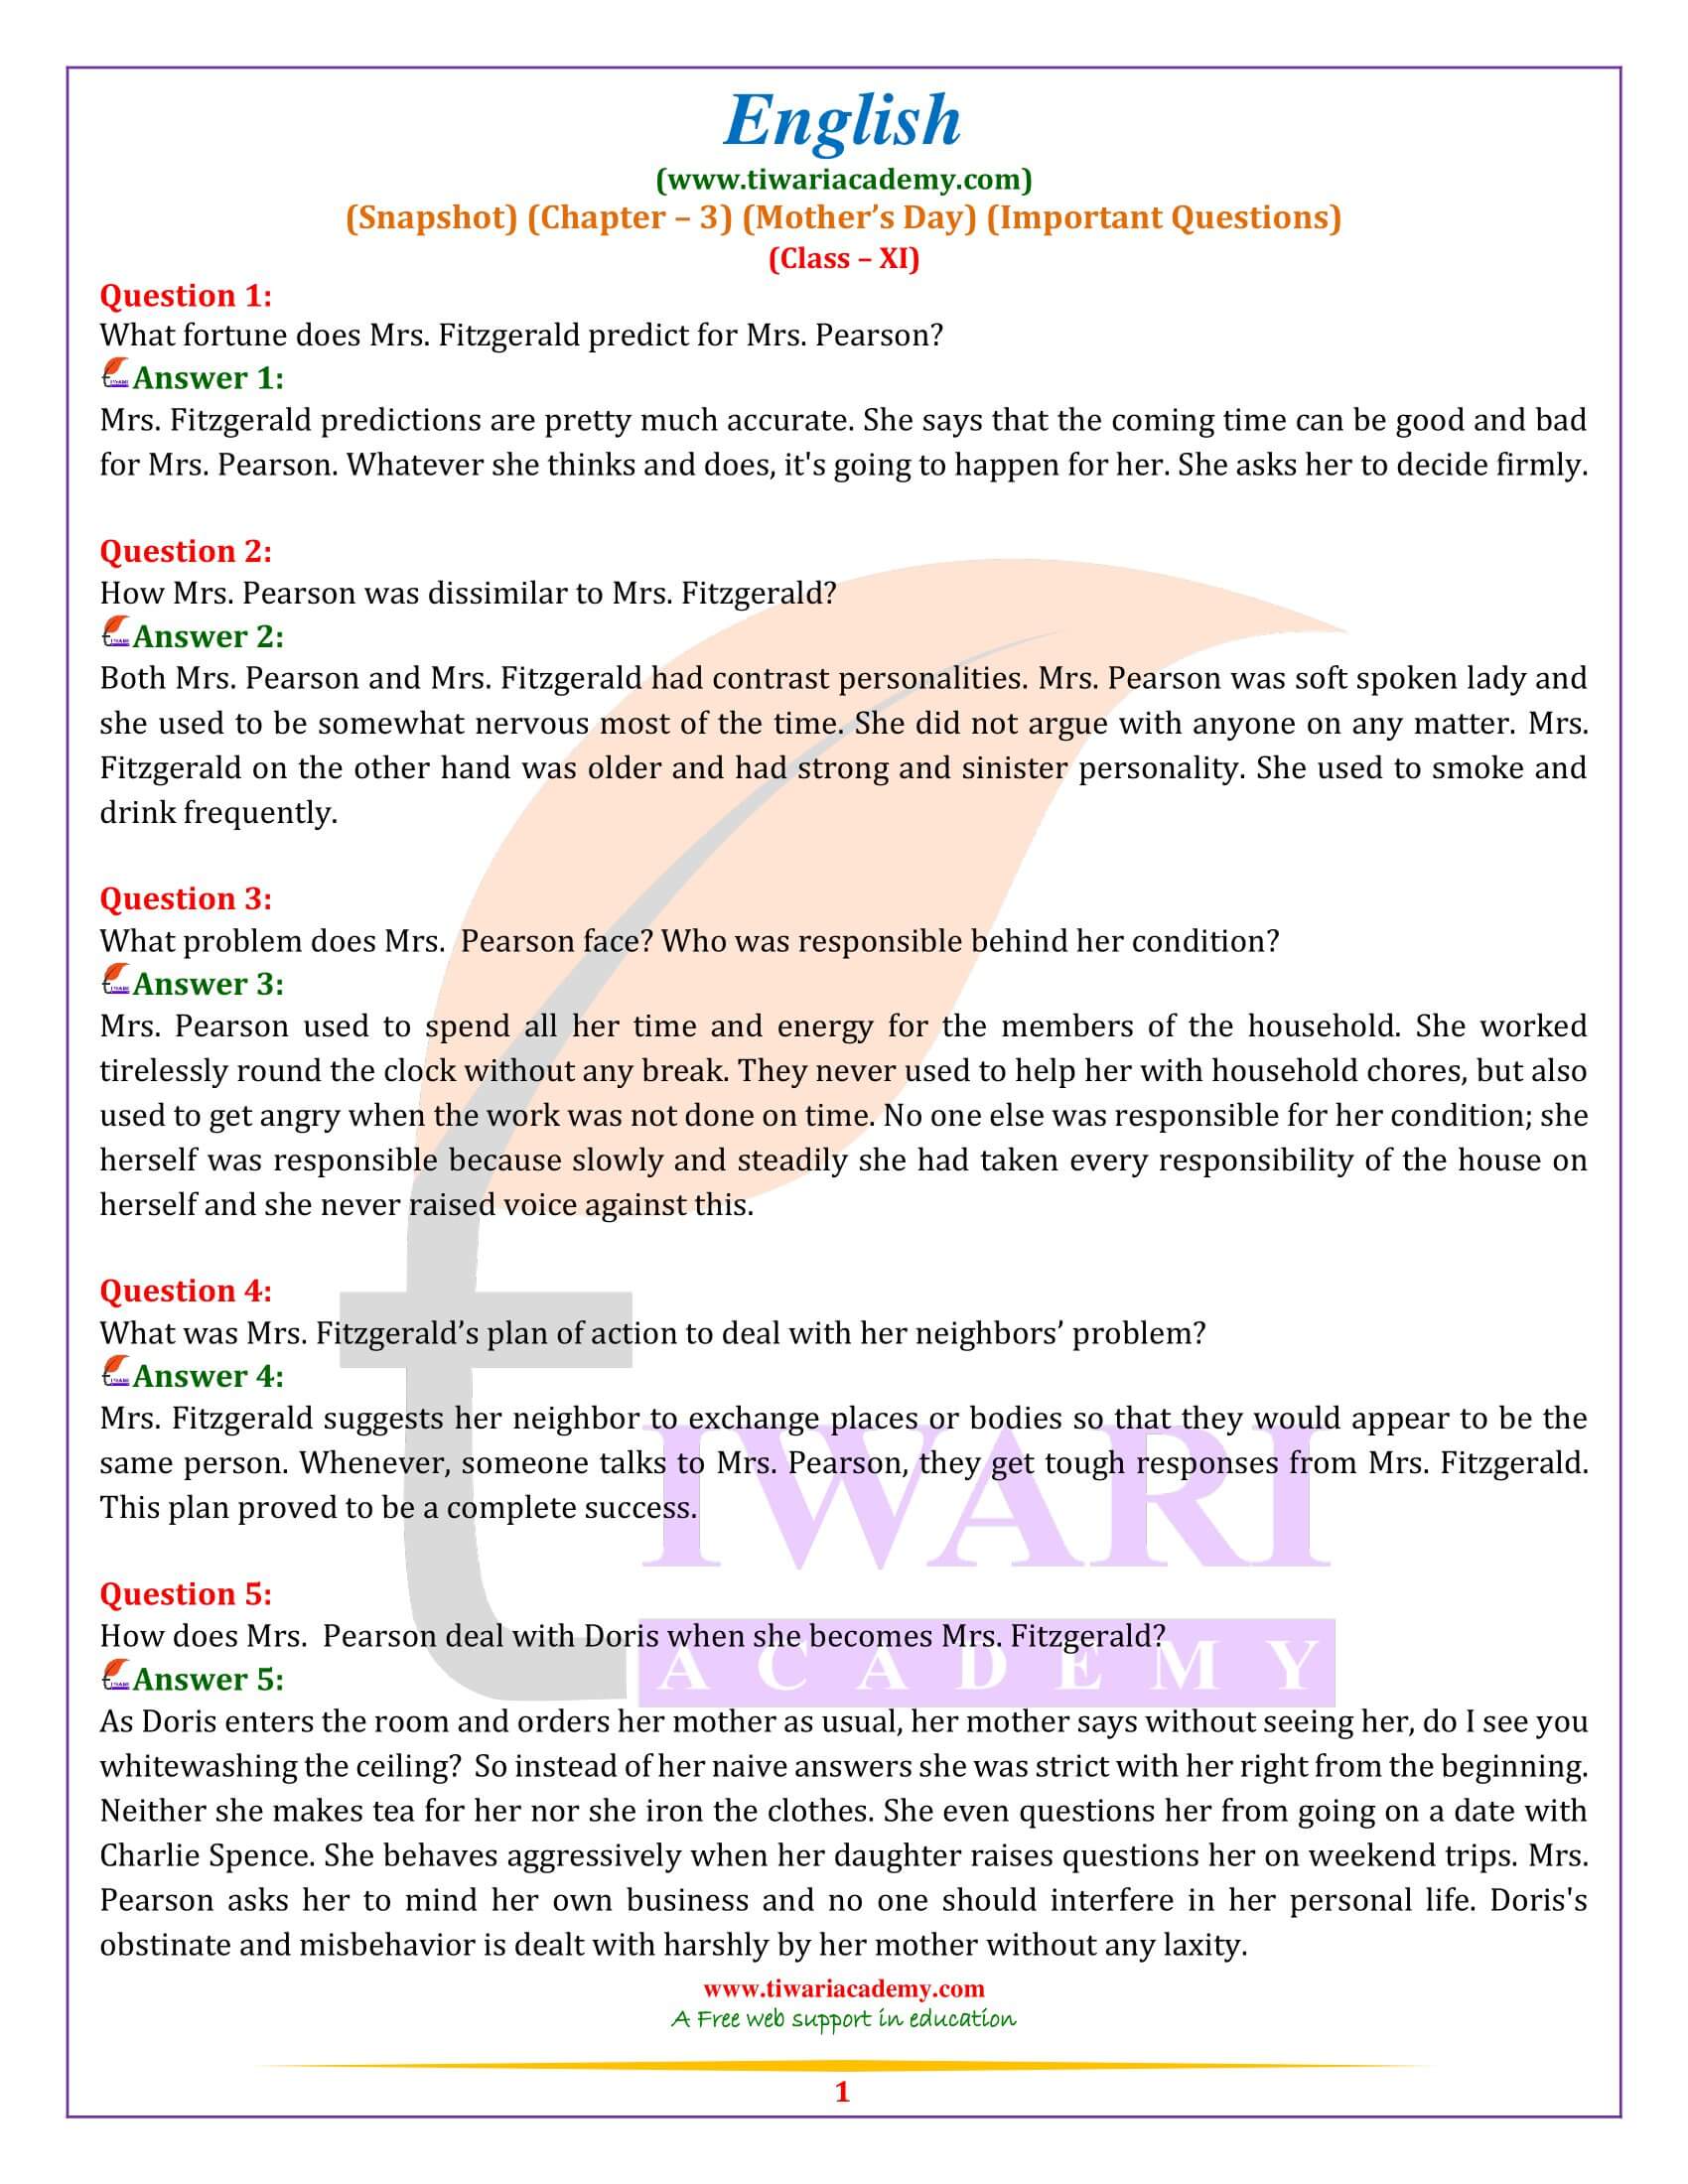 Class 11 English Snapshots Chapter 3 Important Questions